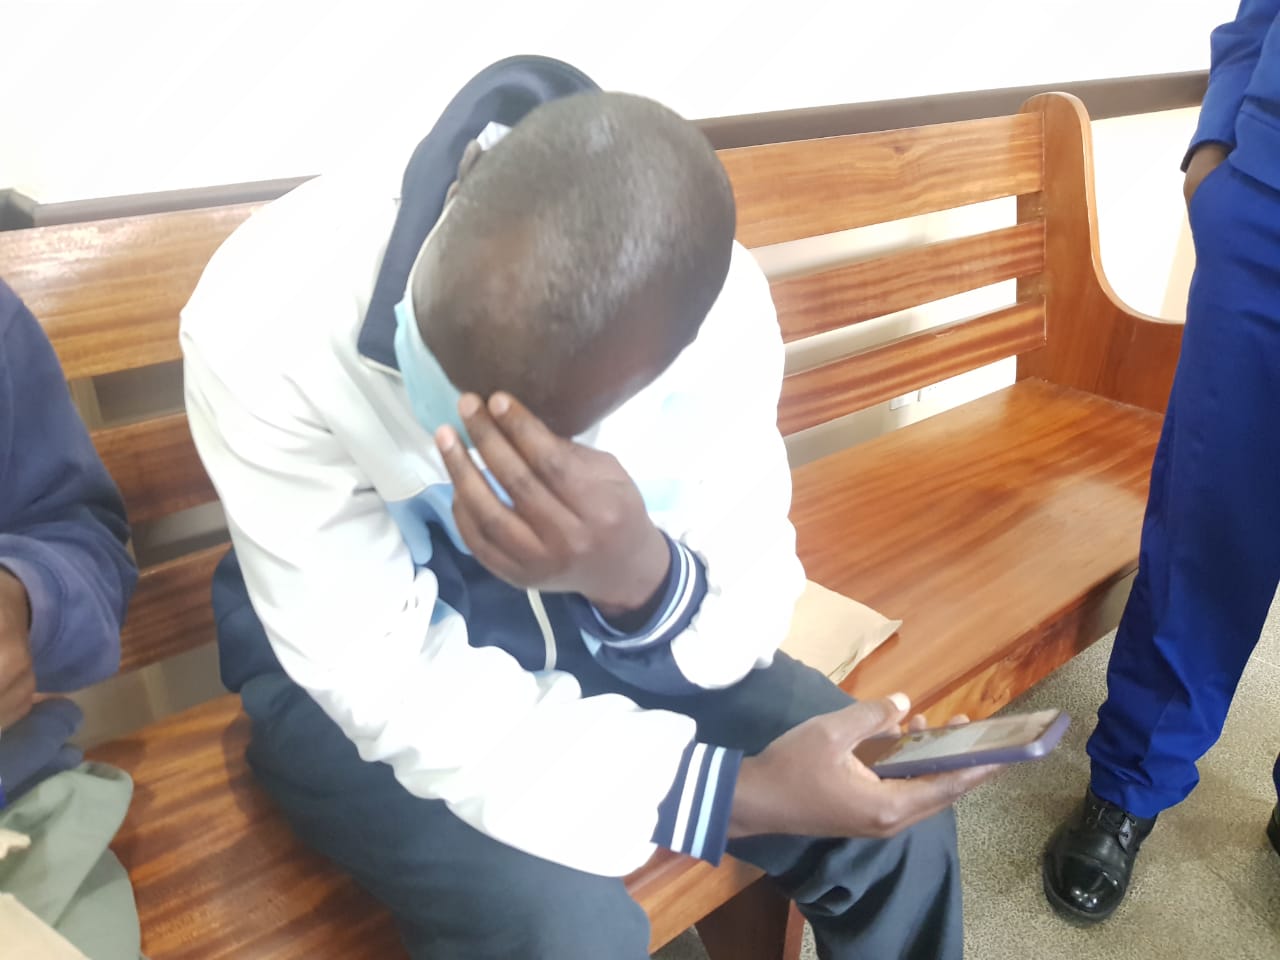 Senior clerical officer charged with receiving Kshs2500 bribe to issue a birth certificate